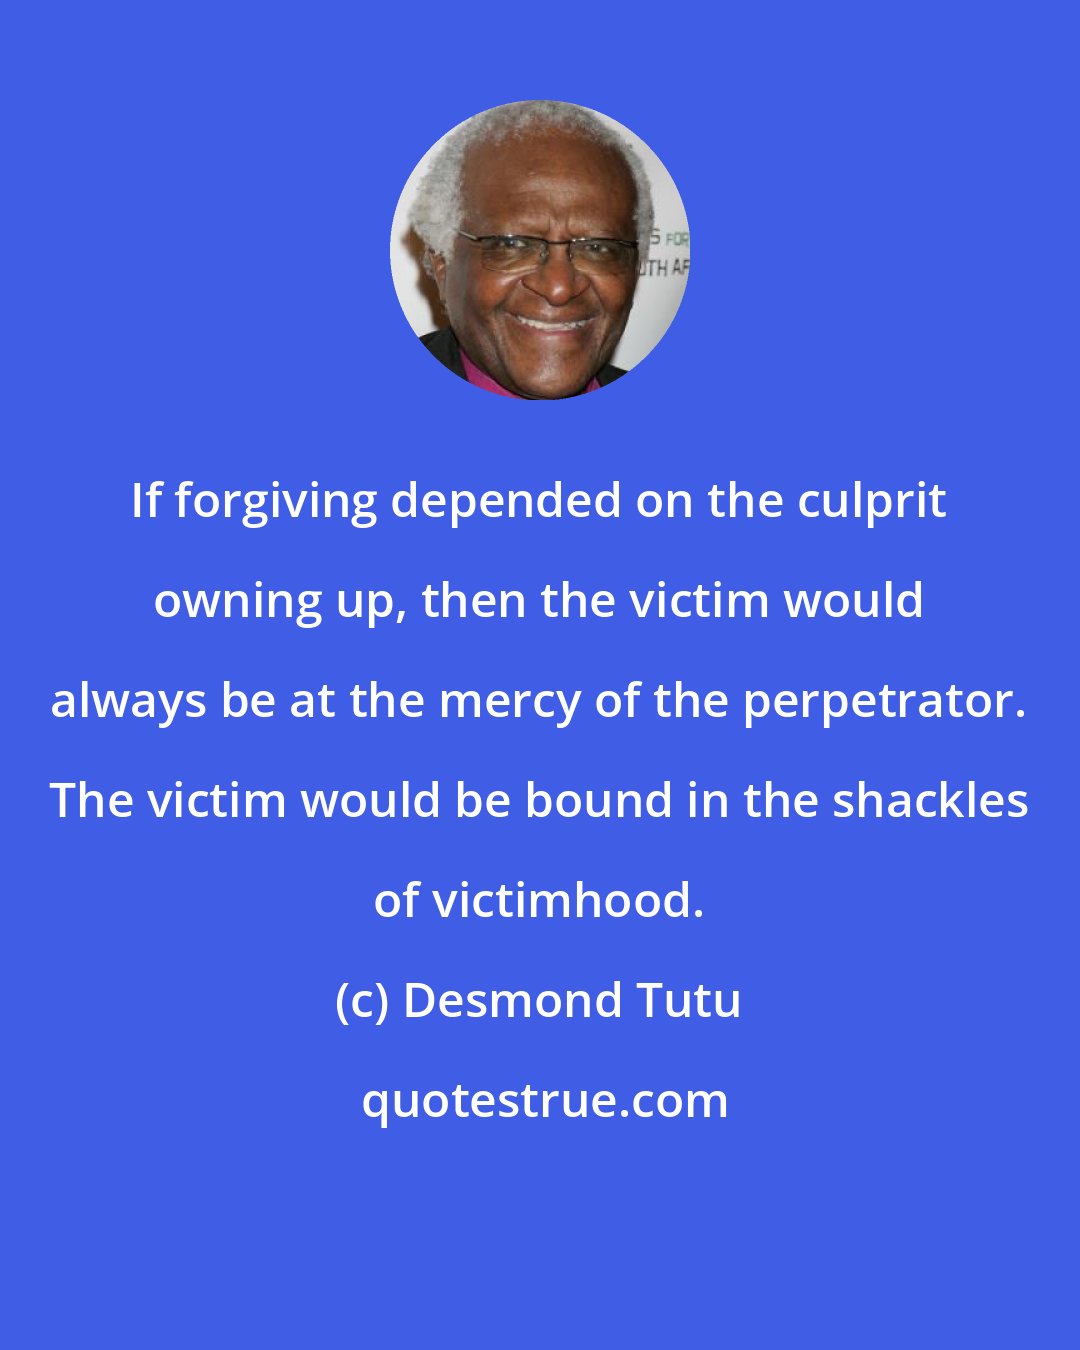 Desmond Tutu: If forgiving depended on the culprit owning up, then the victim would always be at the mercy of the perpetrator. The victim would be bound in the shackles of victimhood.